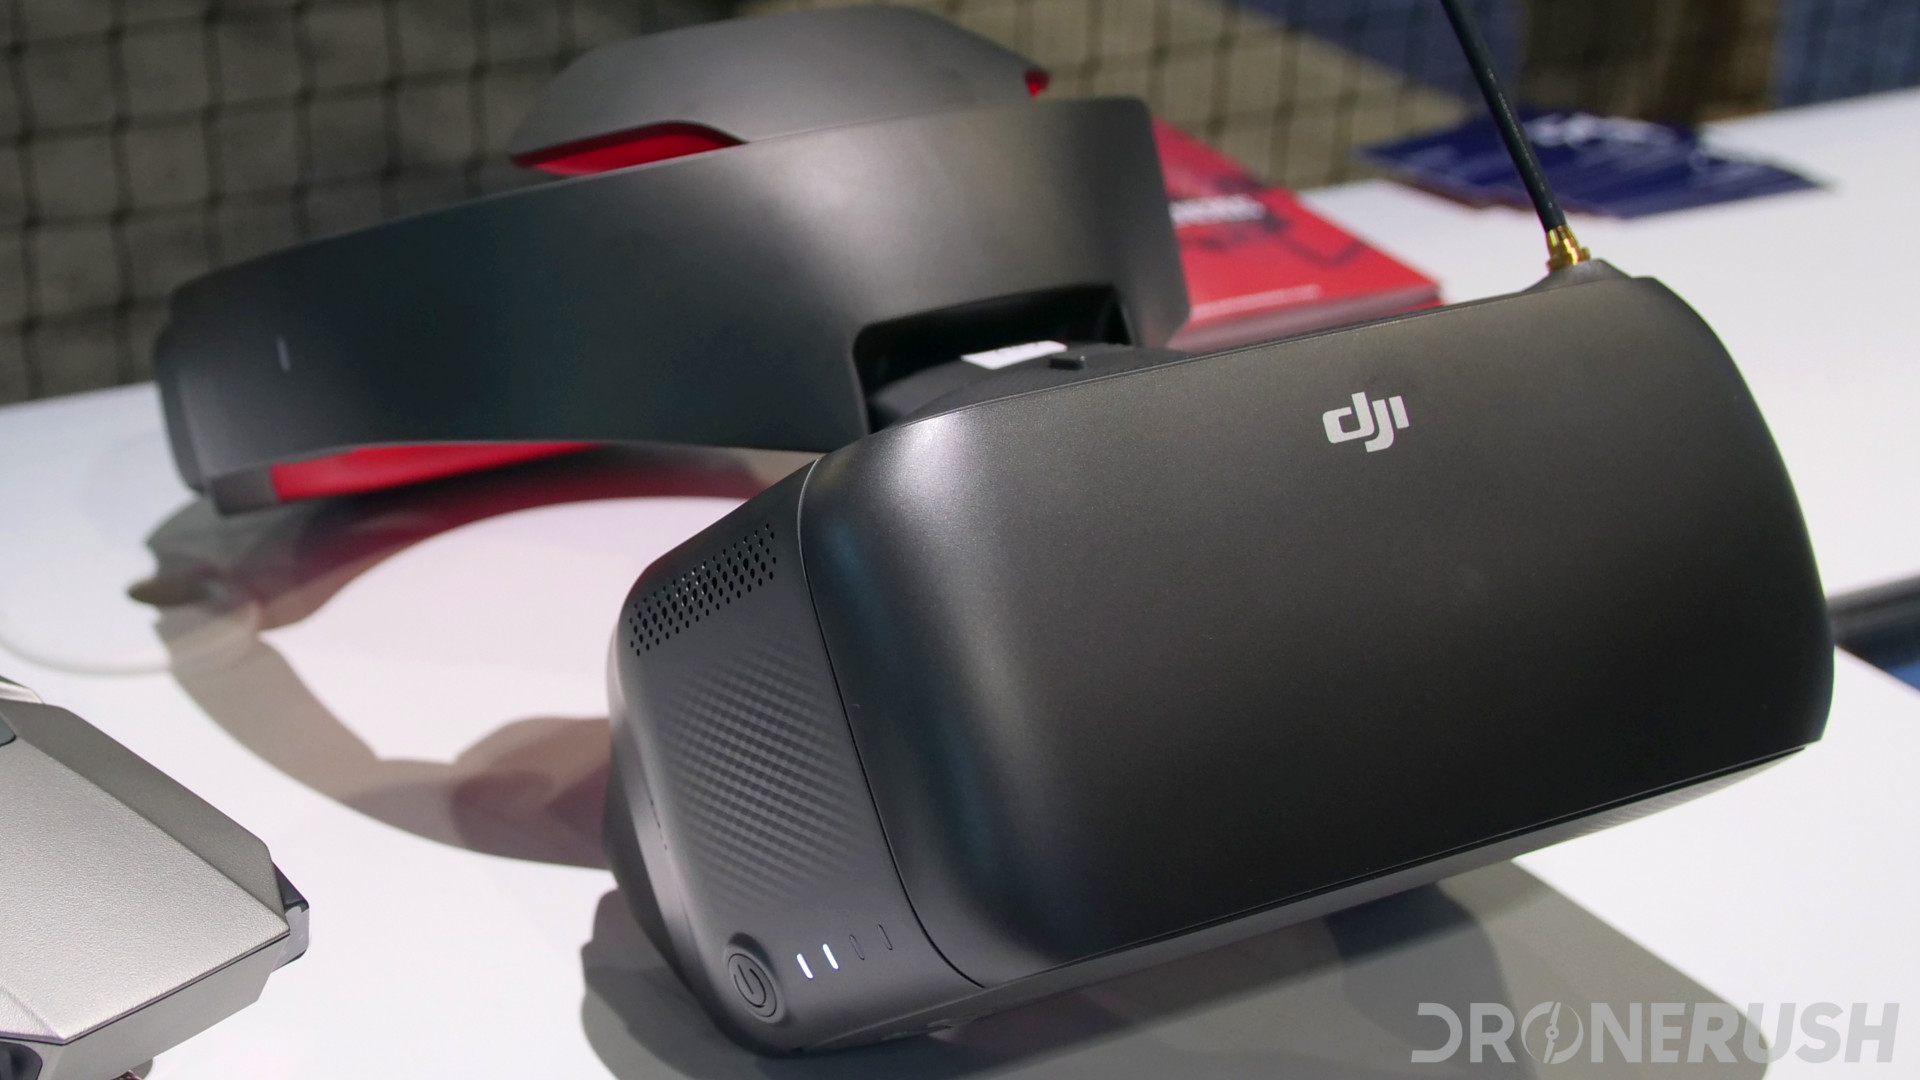 mandskab Dem Far DJI Goggles and the Mavic Pro - a clever VR headset - Drone Rush